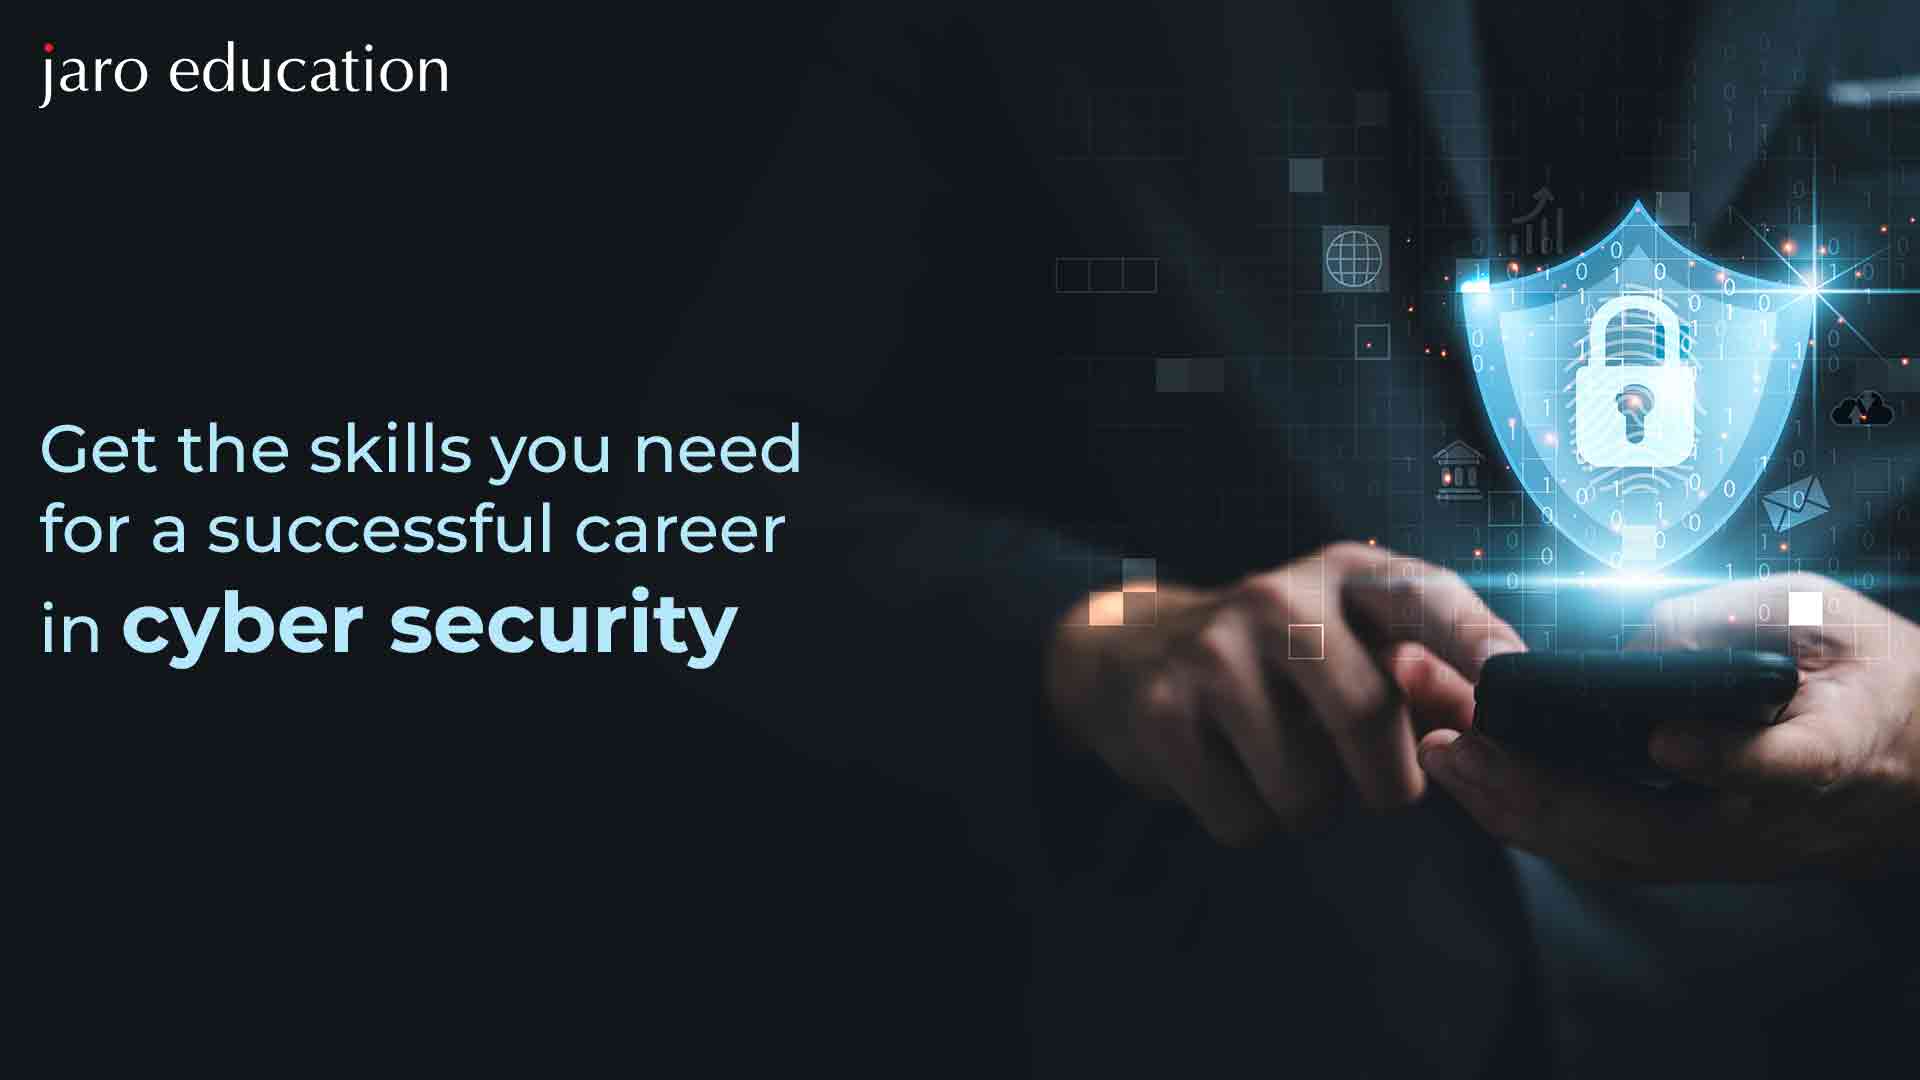 Get-the-skills-you-need-for-a-successful-career-in-cyber-security jaro